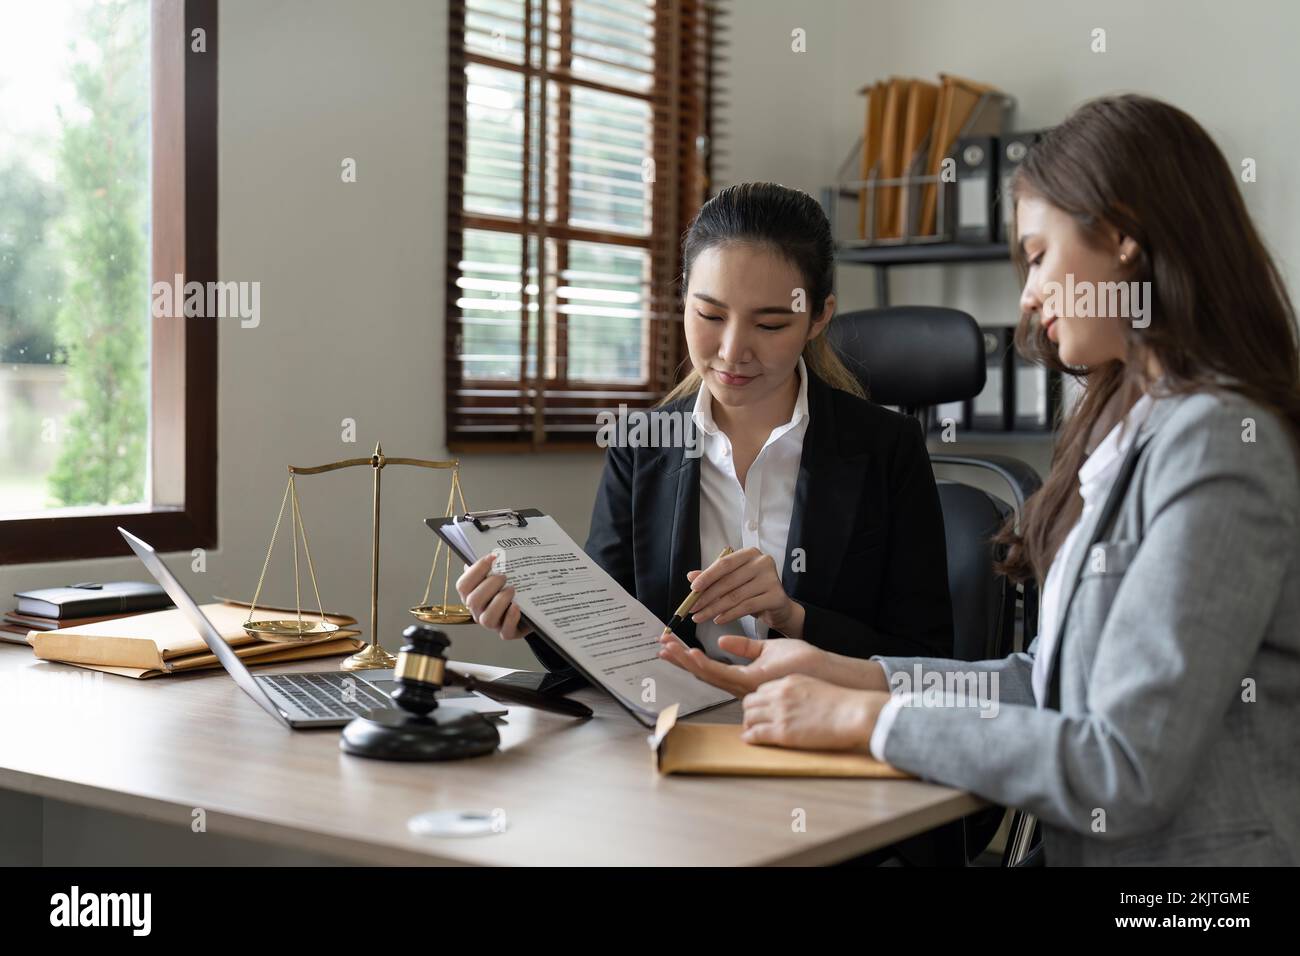 Consultation of Businesswoman and female lawyer or judge counselor having team meeting with client, Law and Legal services concept. Stock Photo